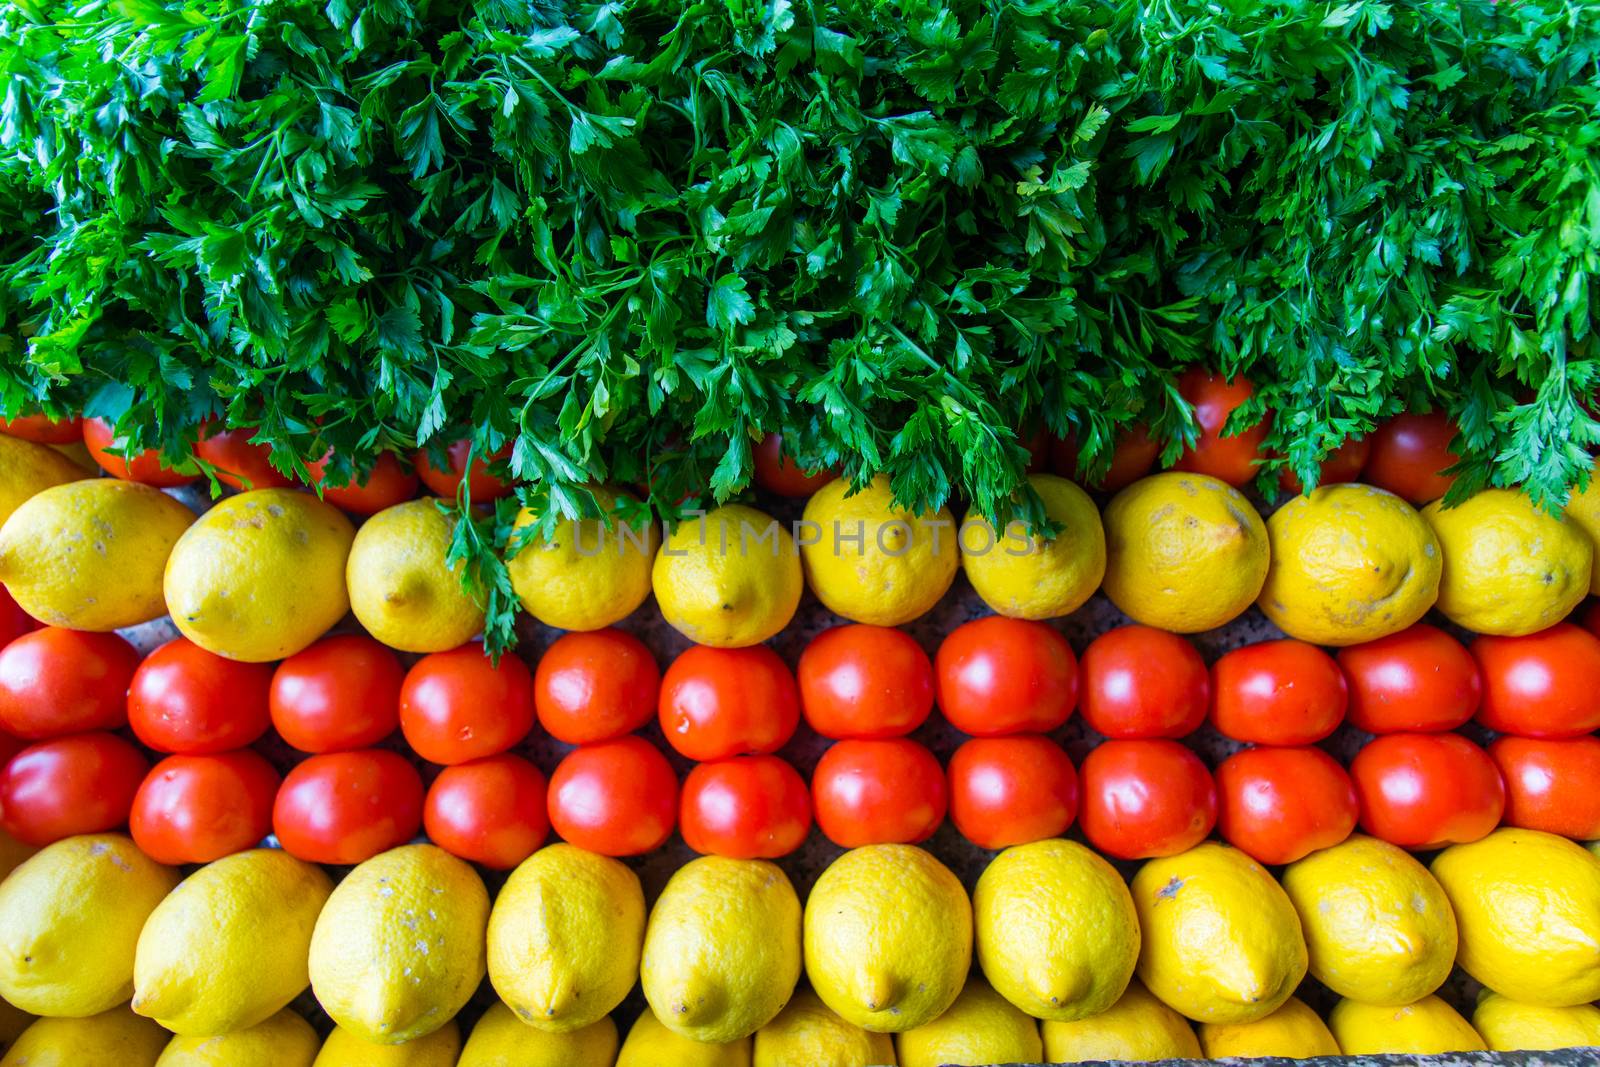 background arranged with tomatoes, lemon and parsley. vegetable and fruit framework. harvest. winter and spring. healthy nutrition background of different vegetables on table.